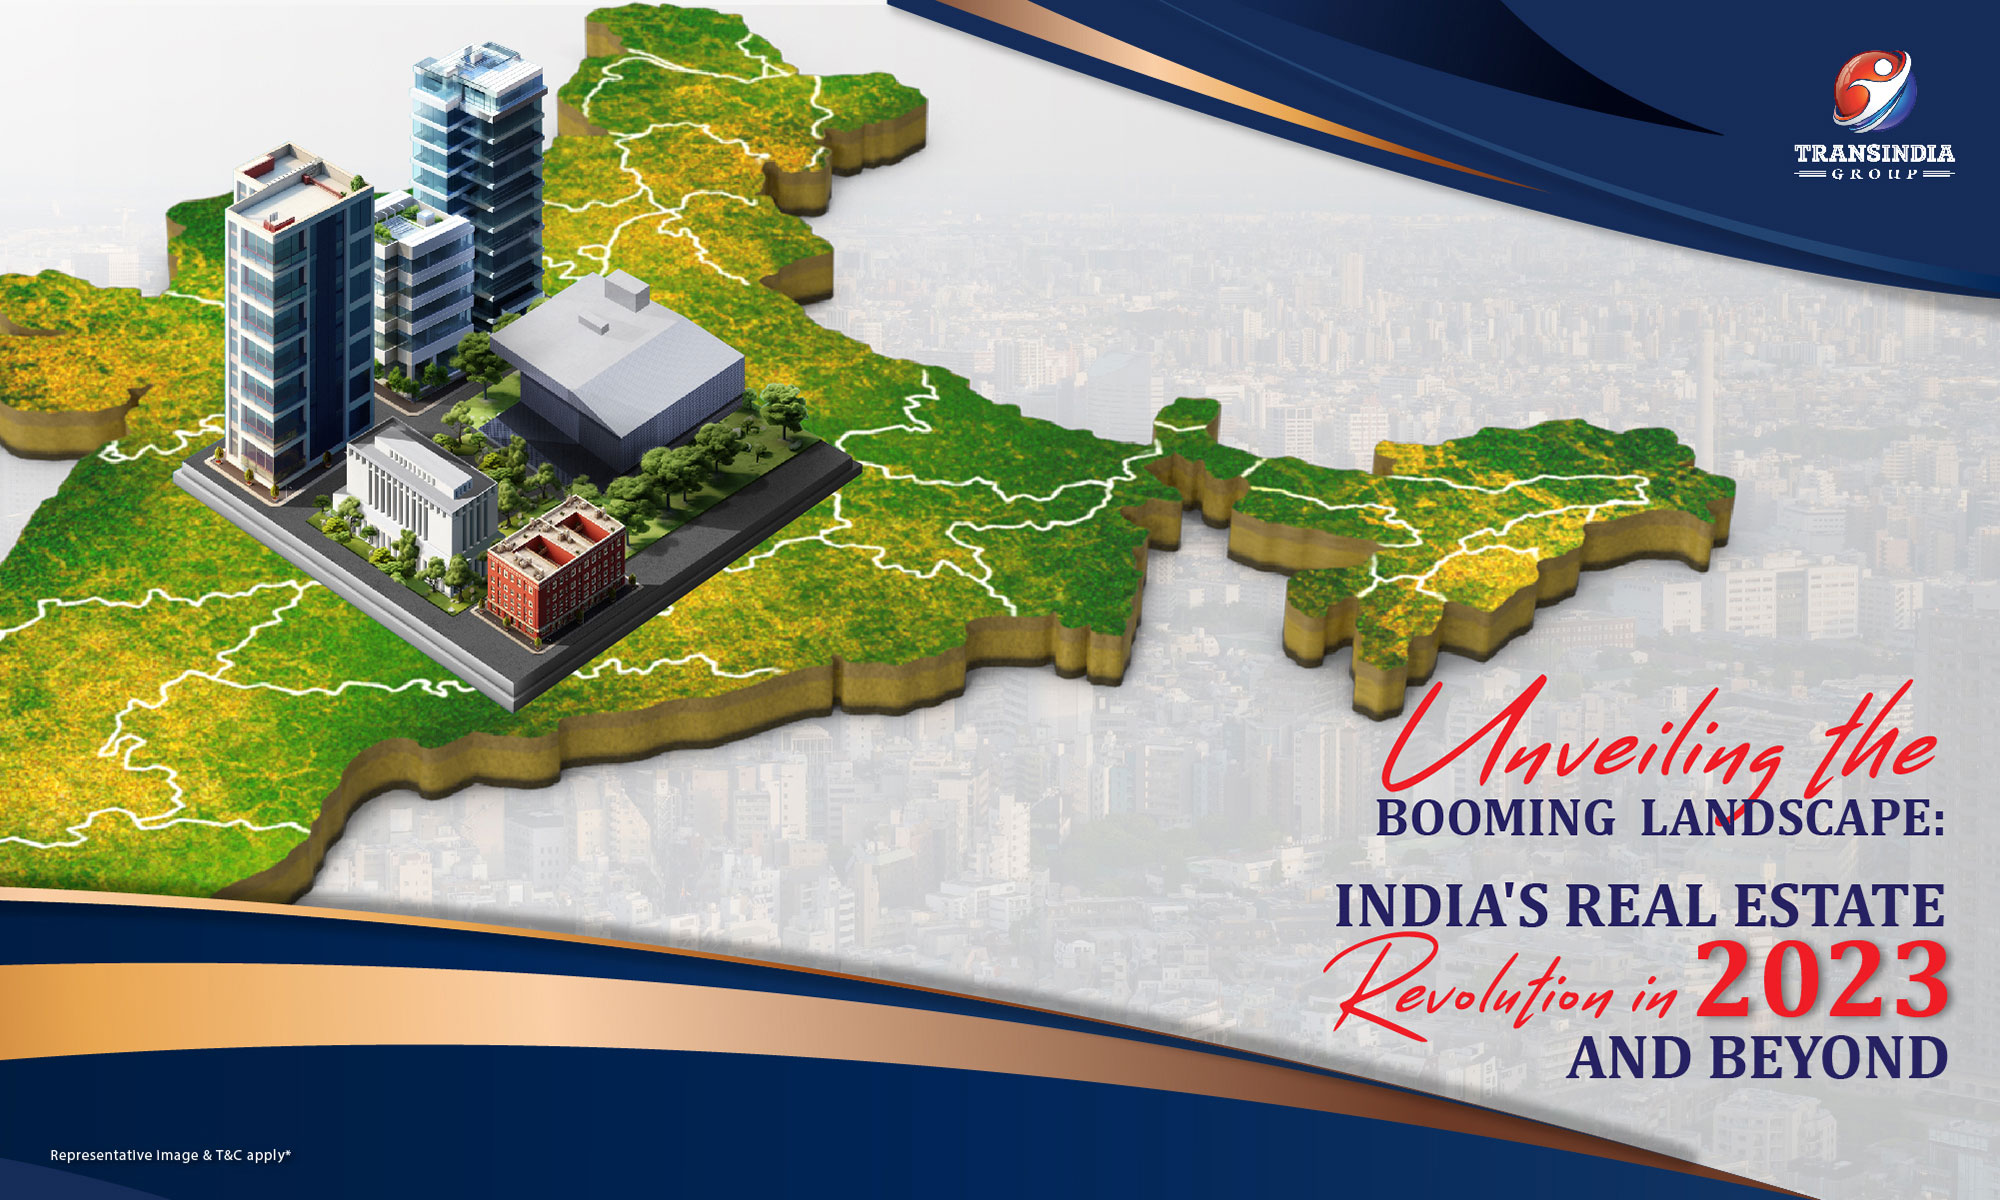 Unveiling the Booming Landscape: India’s Real Estate Revolution in 2023 and Beyond